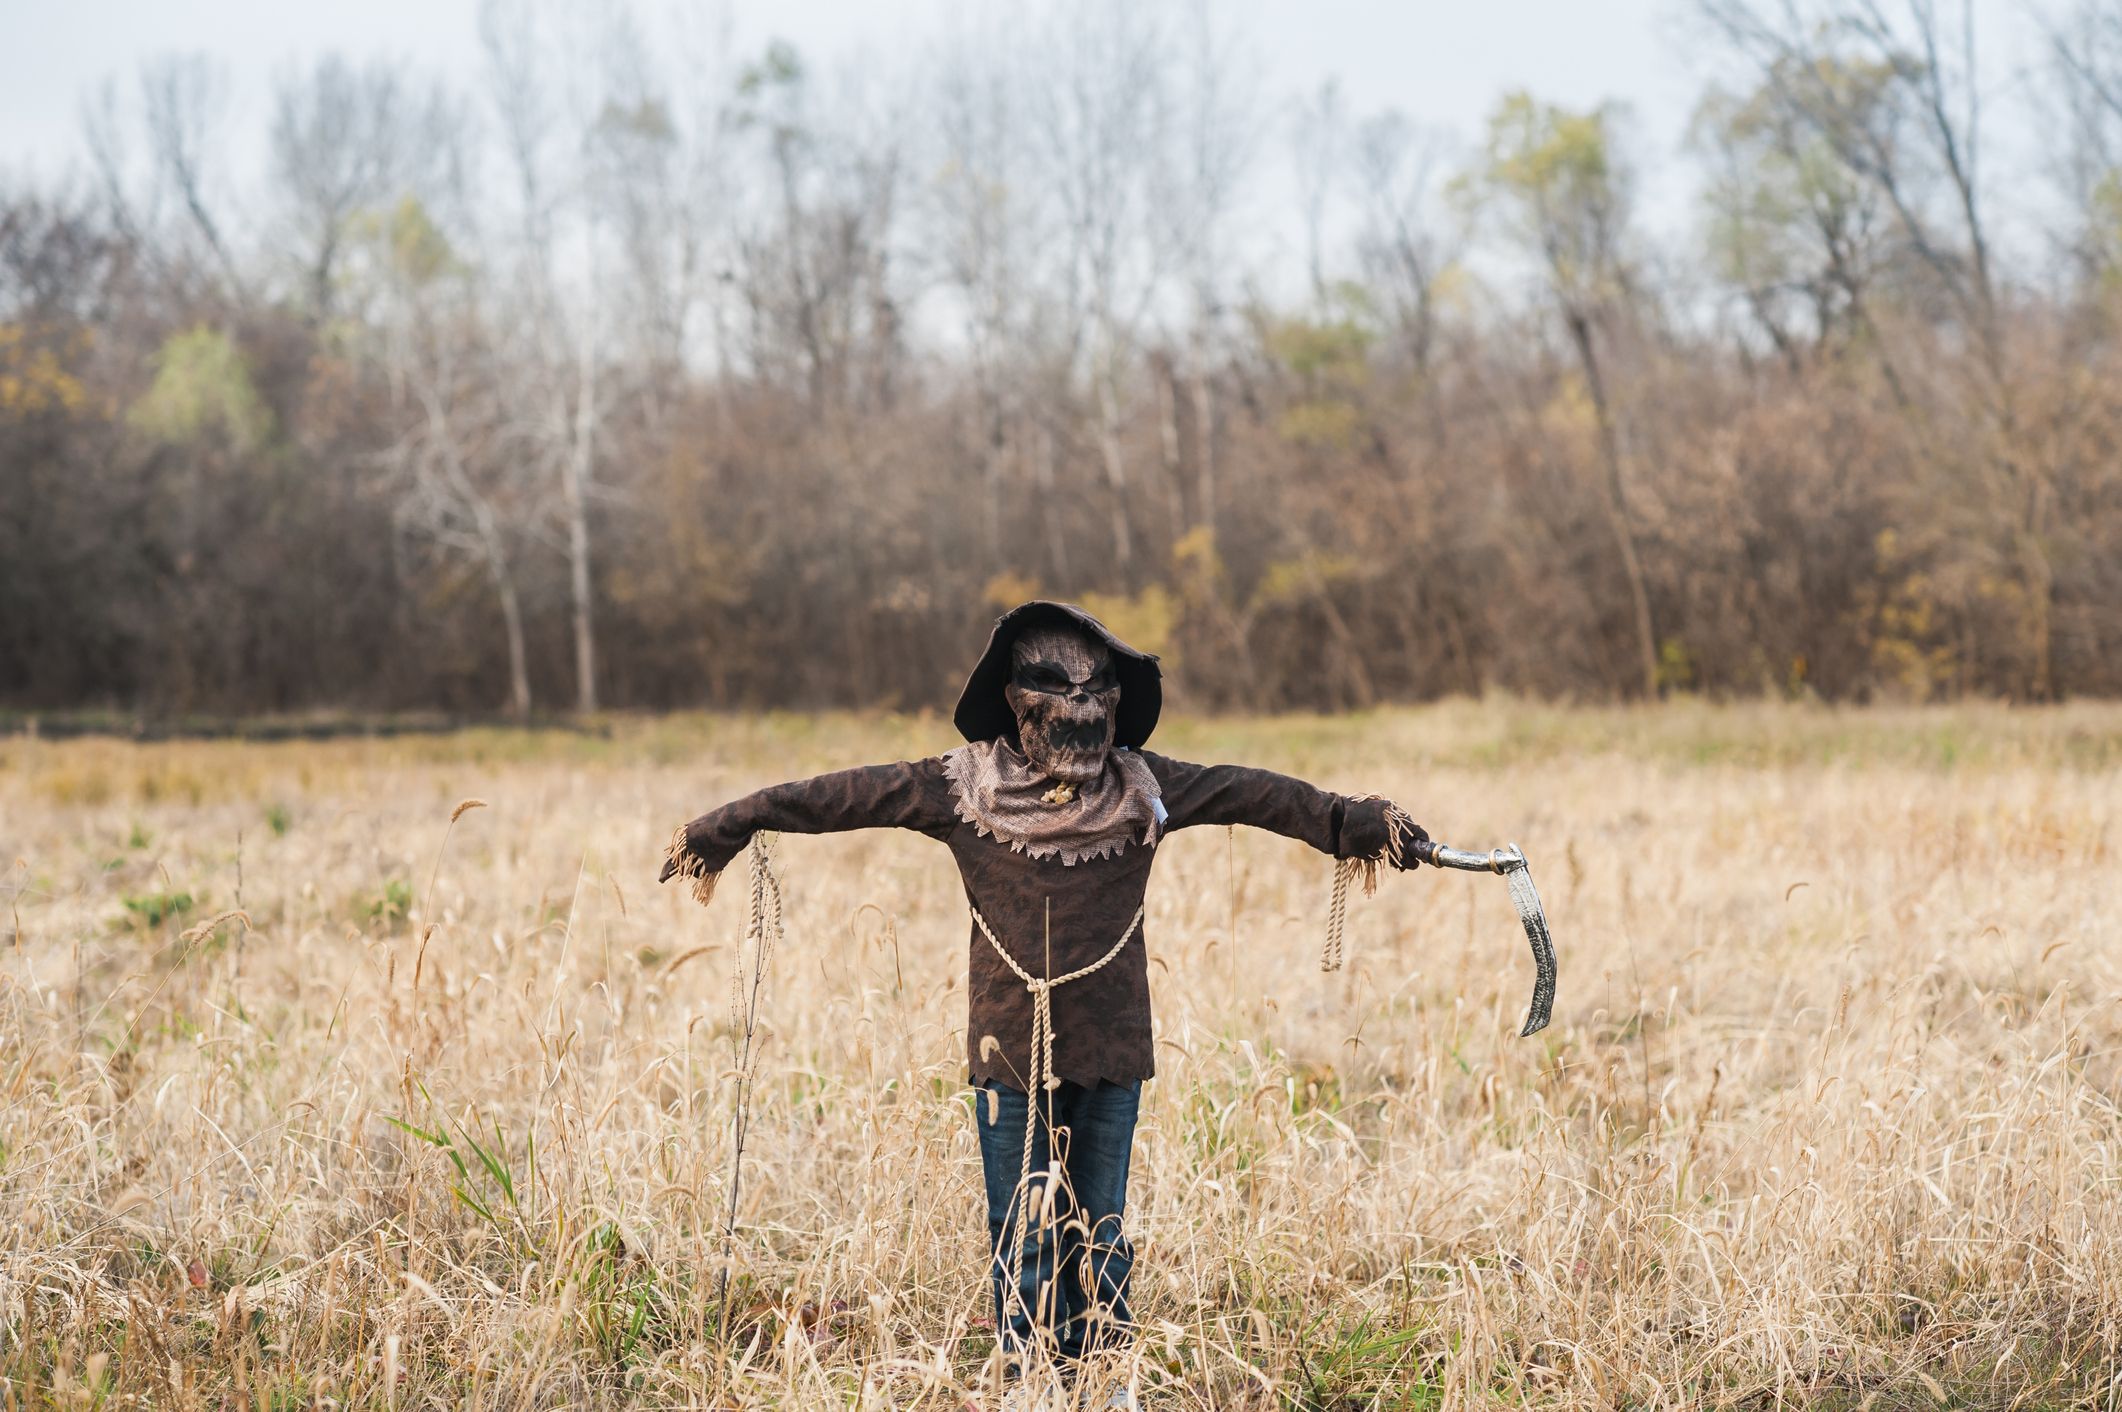 11 DIY Scarecrow Costumes - Best Scarecrow Costume Ideas for Kids and Adults